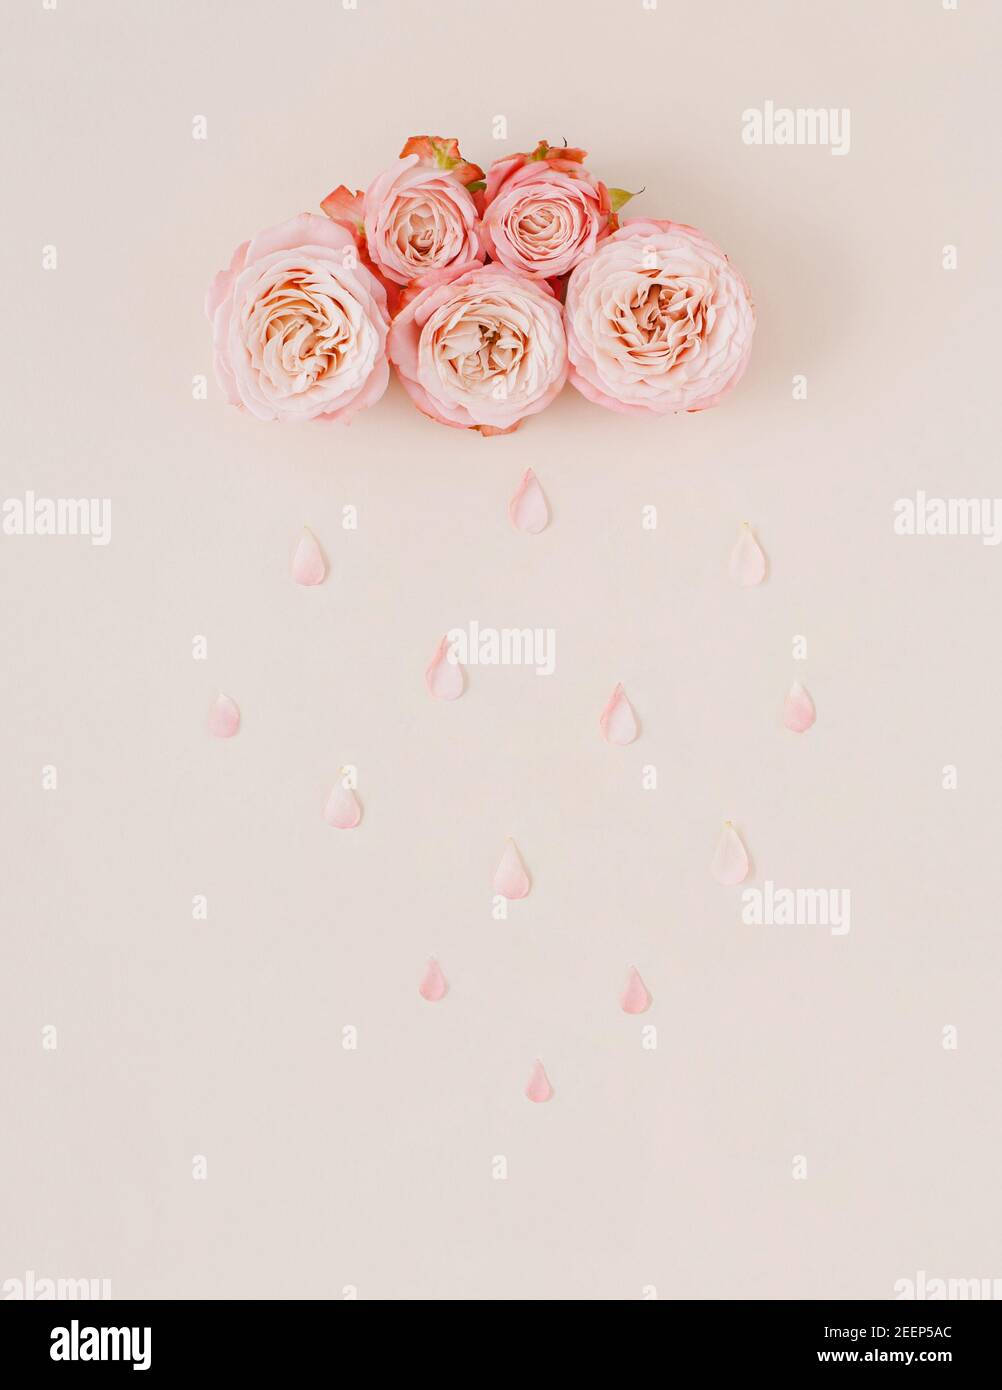 Pink Roses On A Pink Background With Water Drops - Stock Image Wallpaper